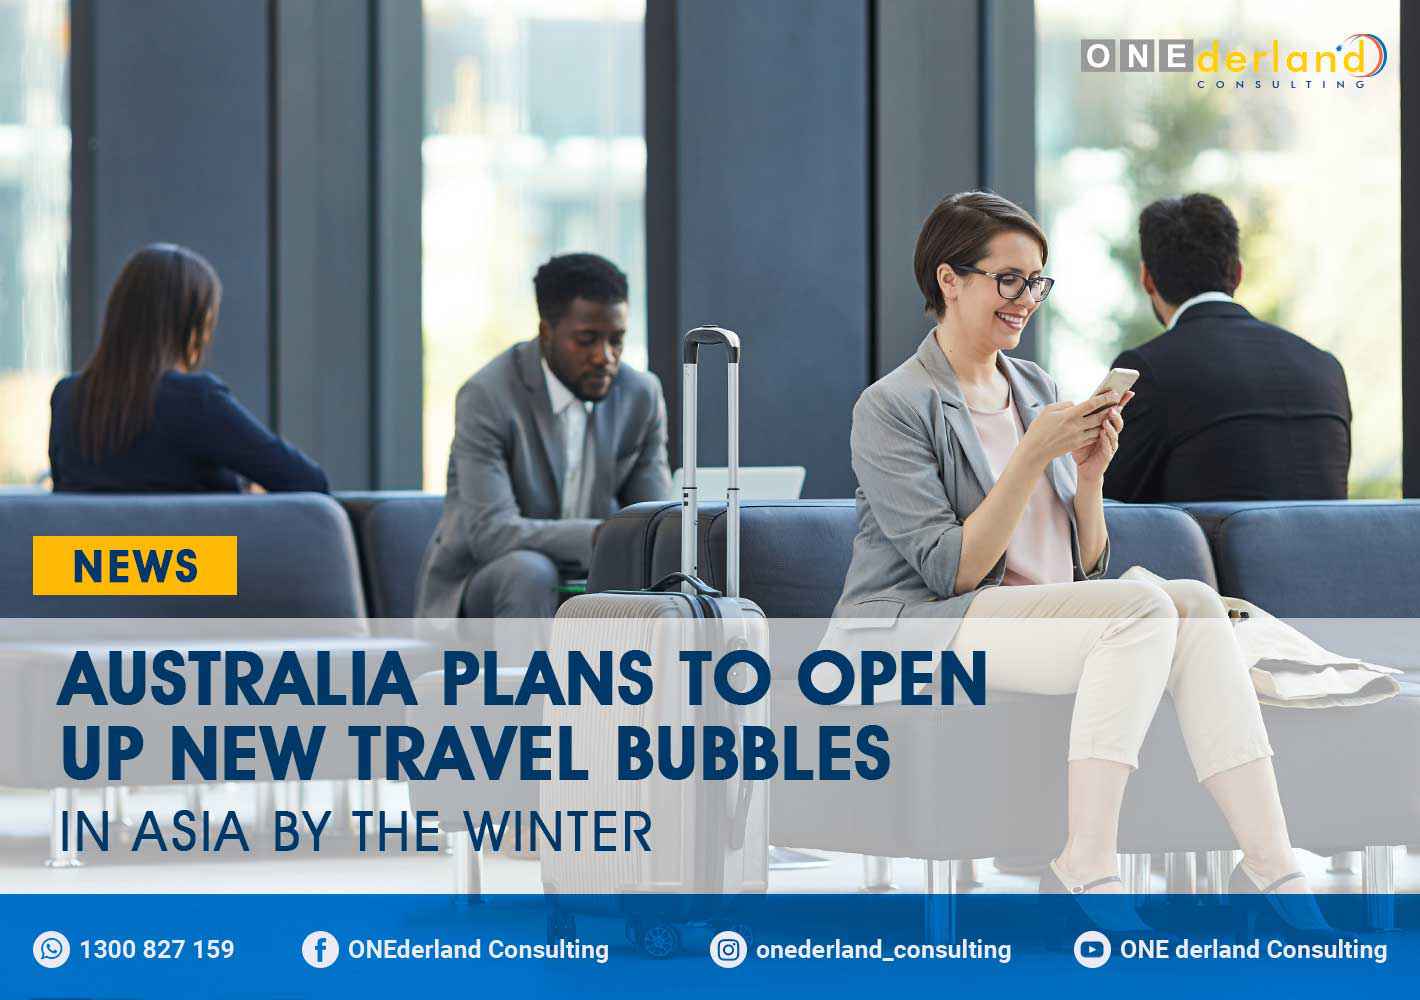 Australia Plans to Open Up New Travel Bubbles in Asia by the Winter